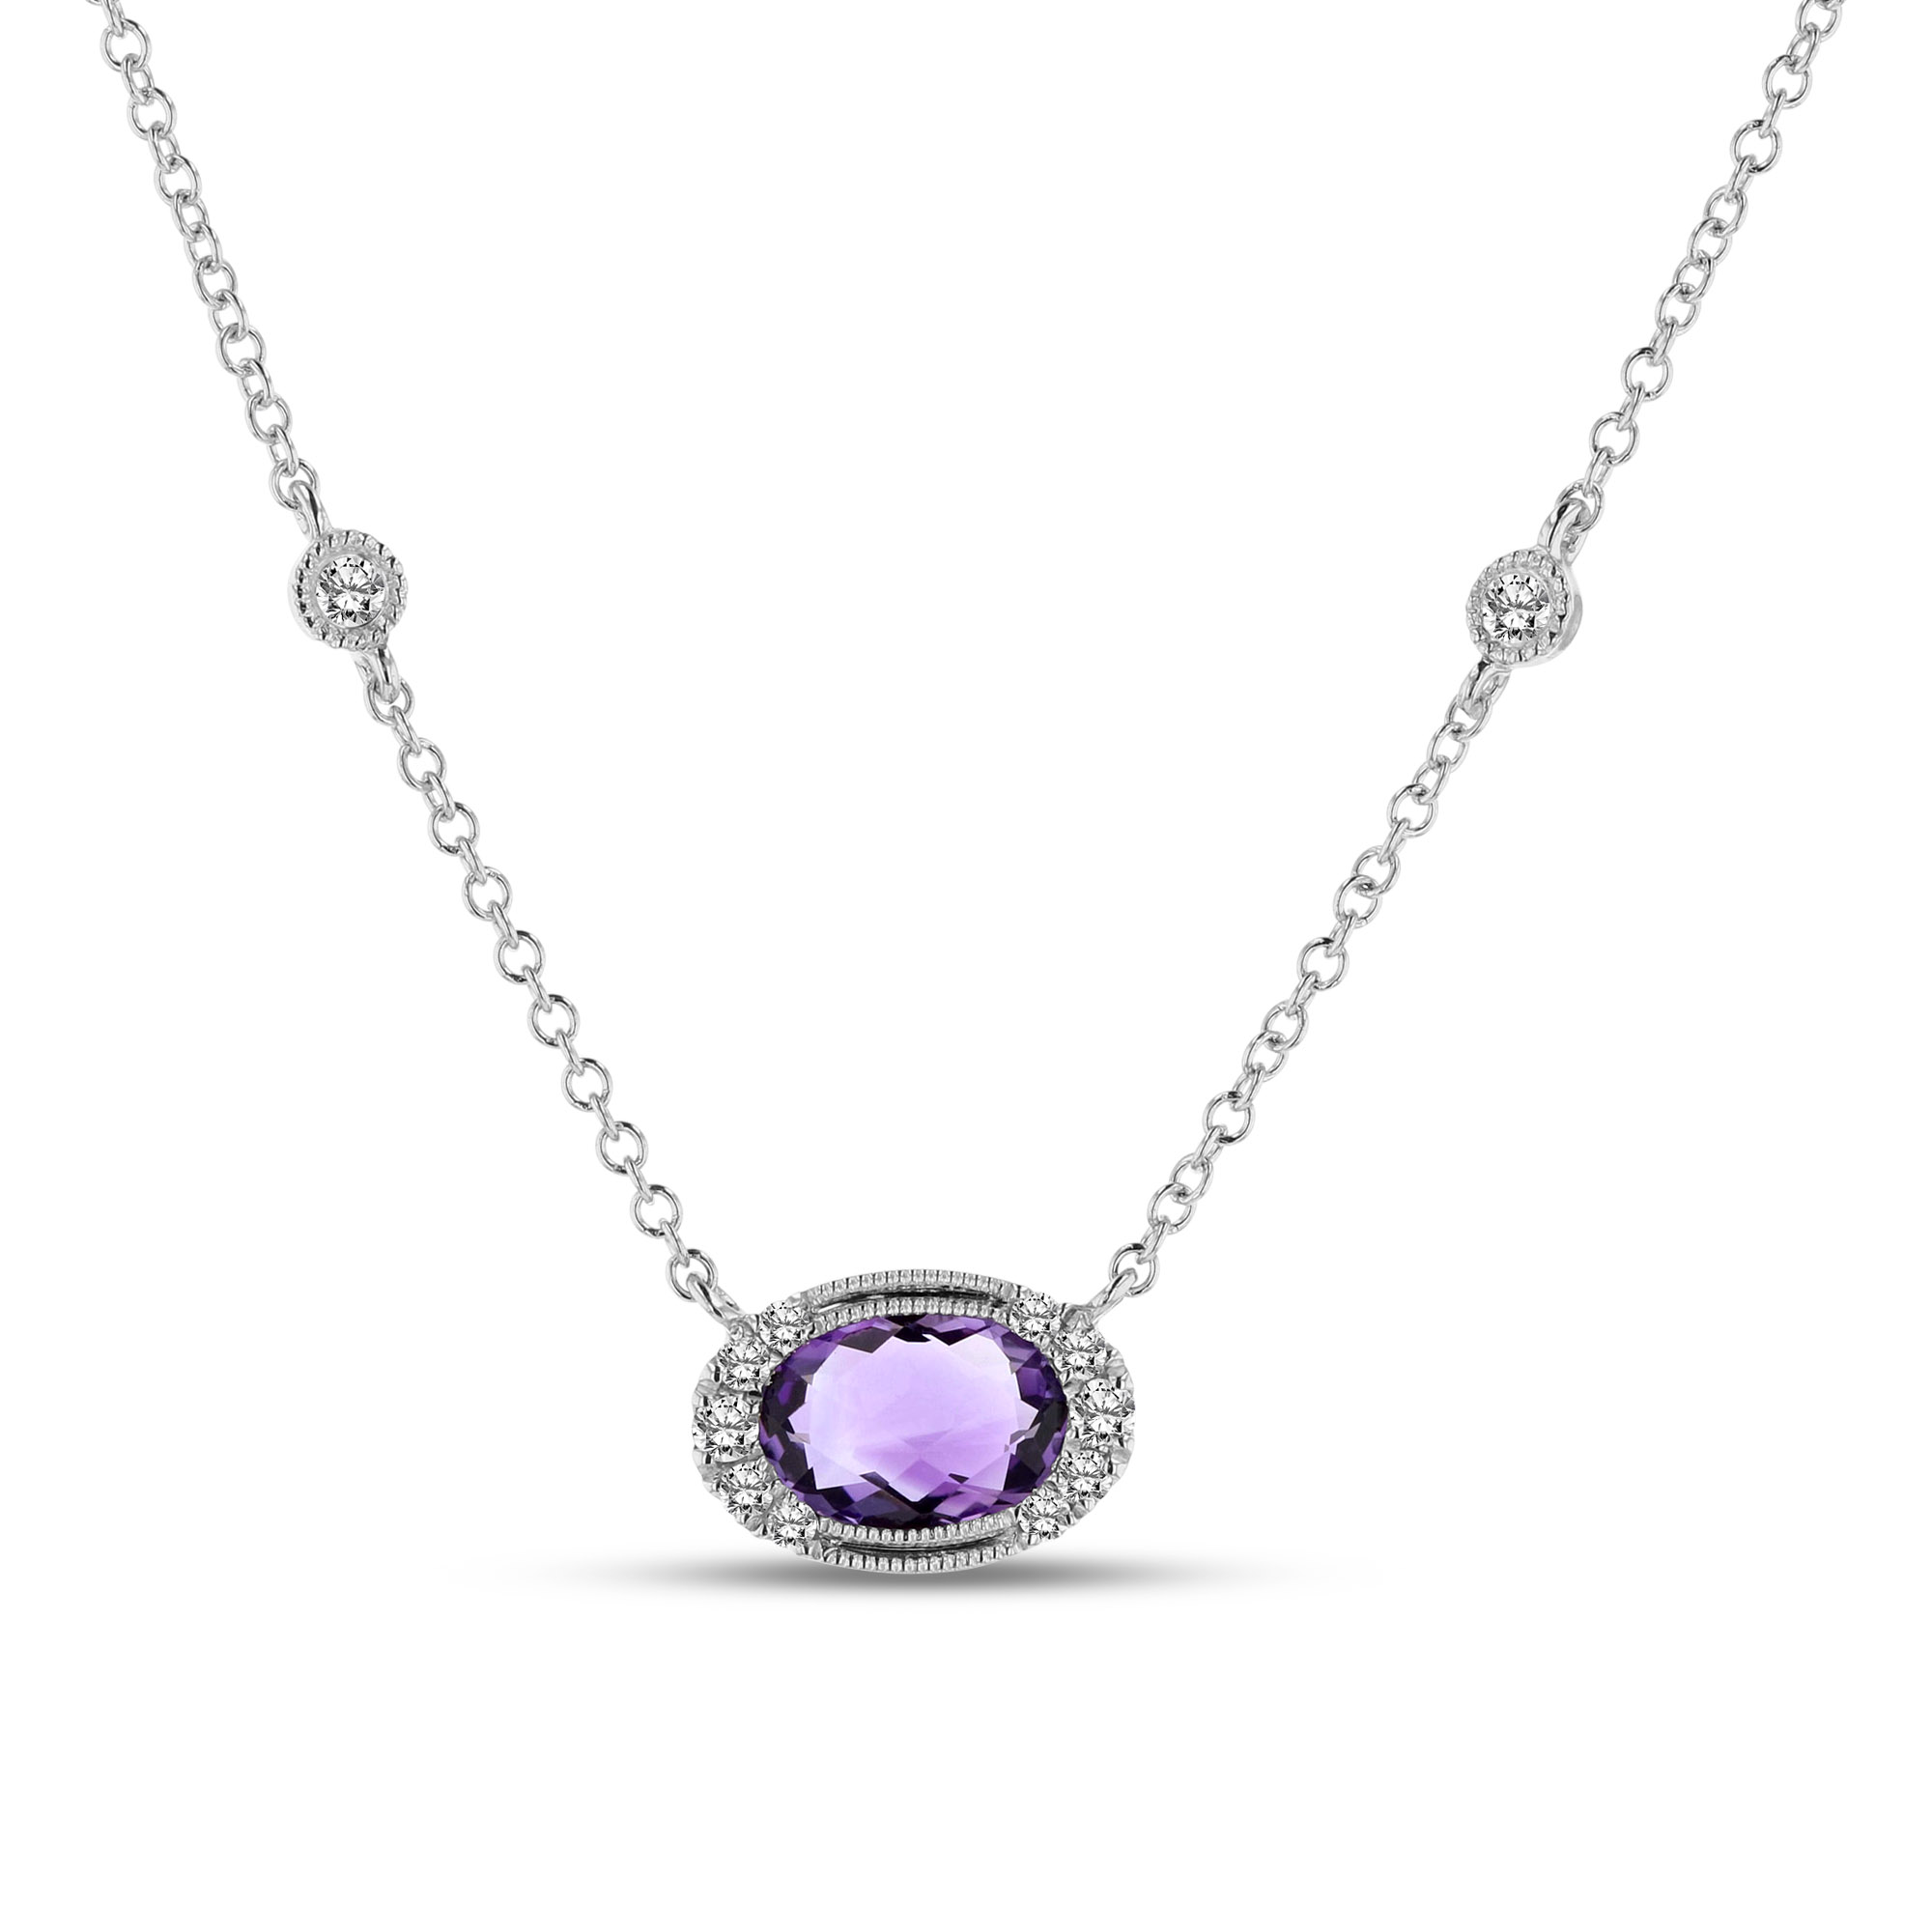 0.13ctw Diamond and Amethyst Pendant in 14k White Gold